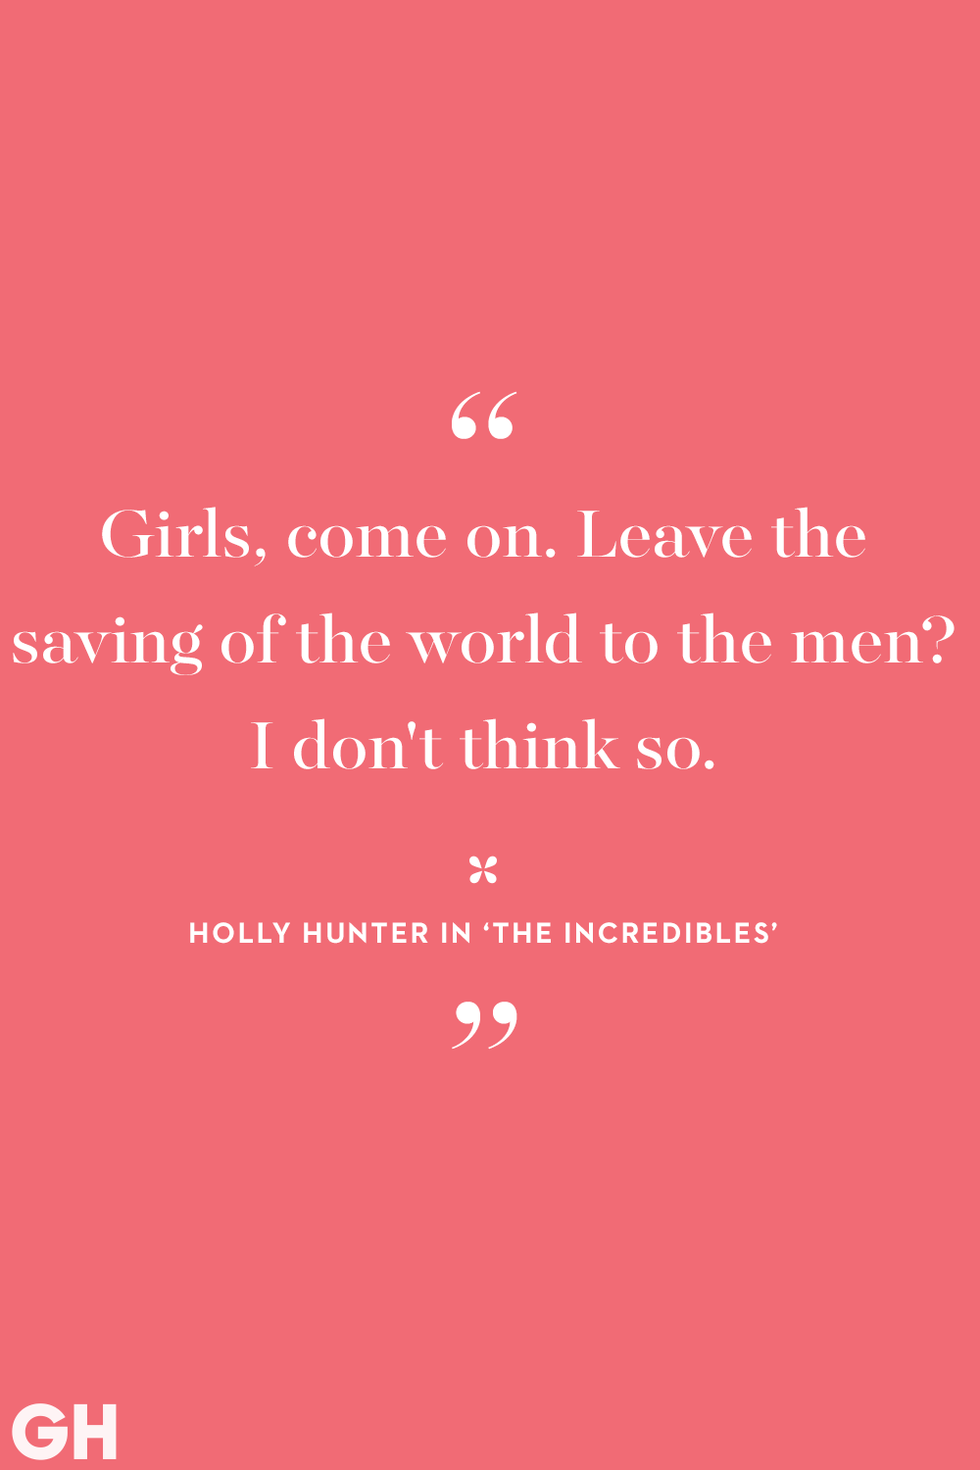 holly hunter in 'the incredibles' quote